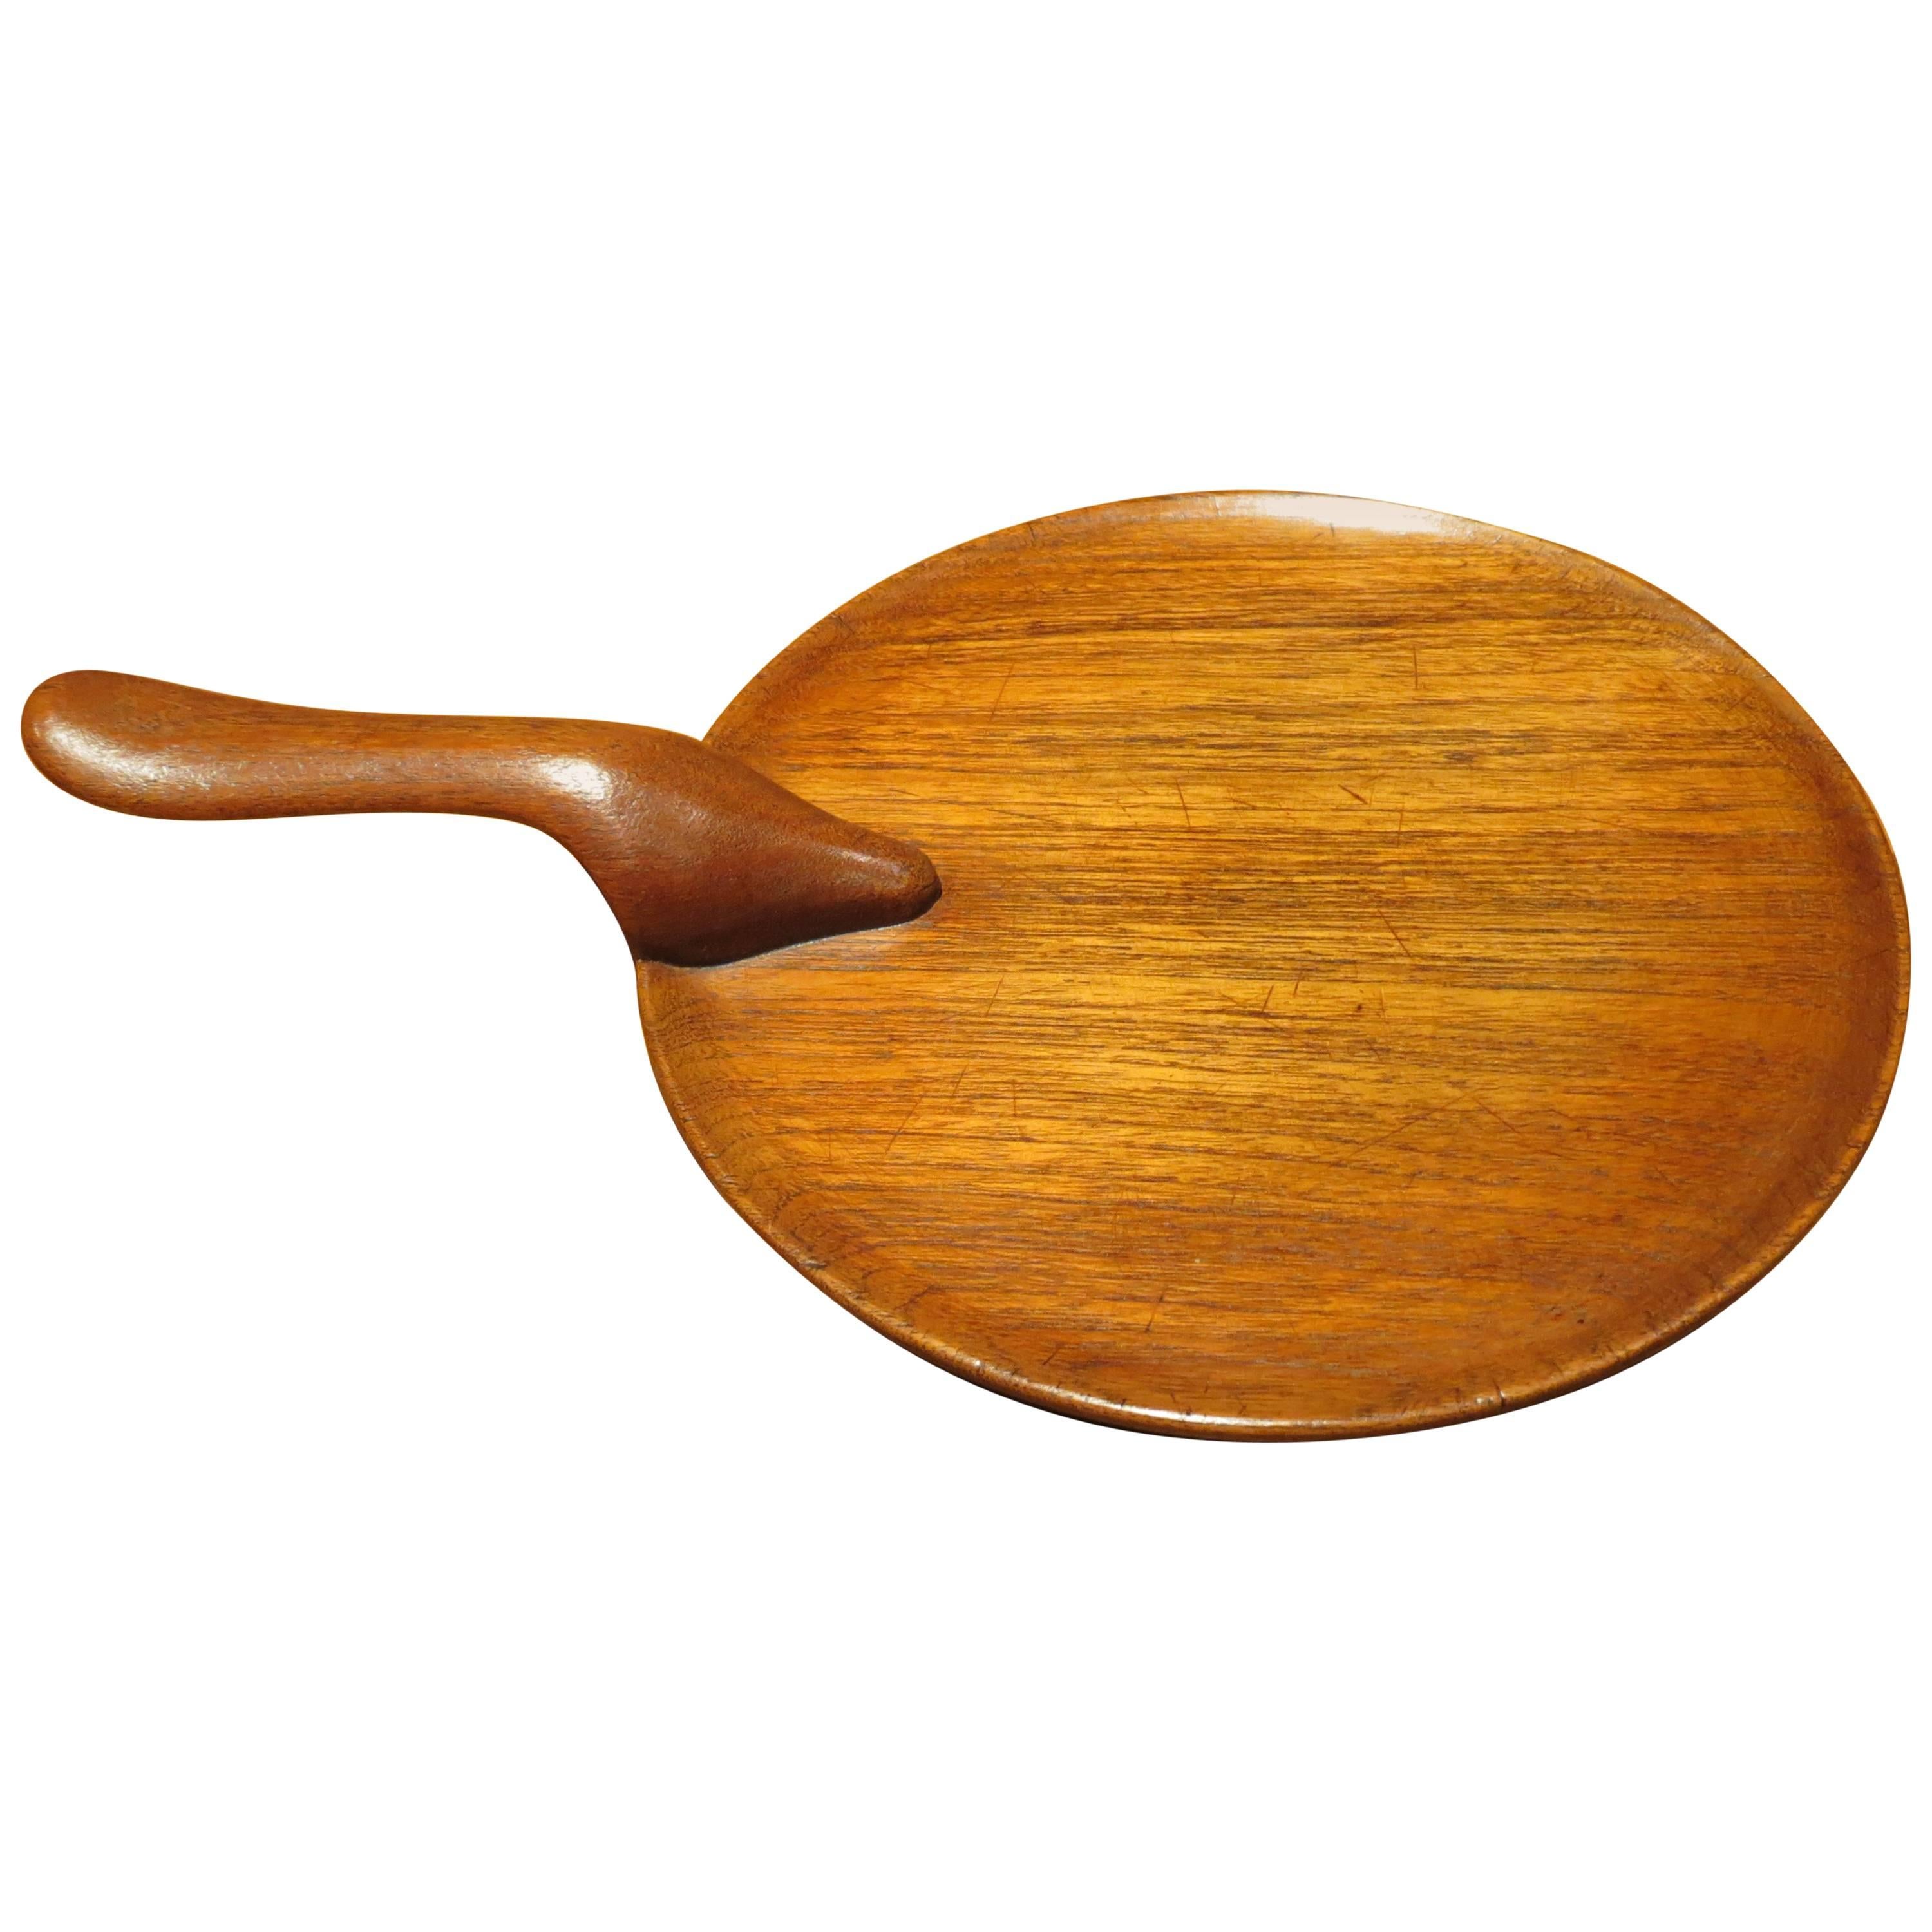 1960s Teak Serving Tray with Handle by Kay Bojesen